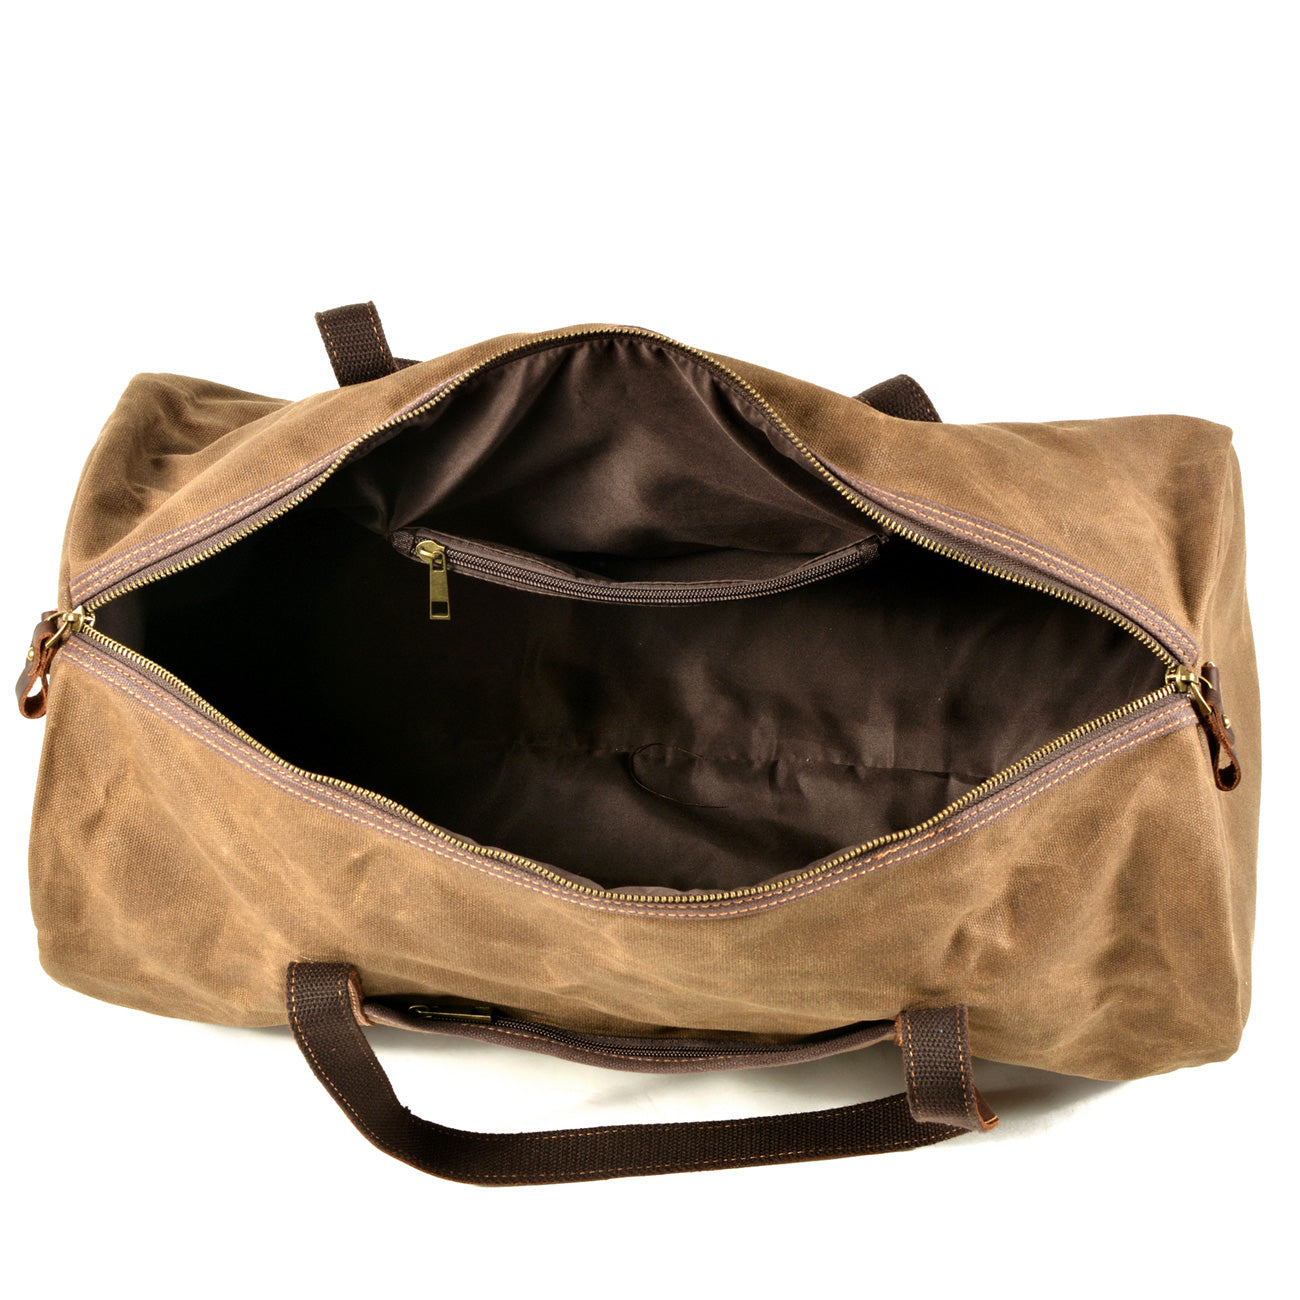 functional and foldable military army duffle bag